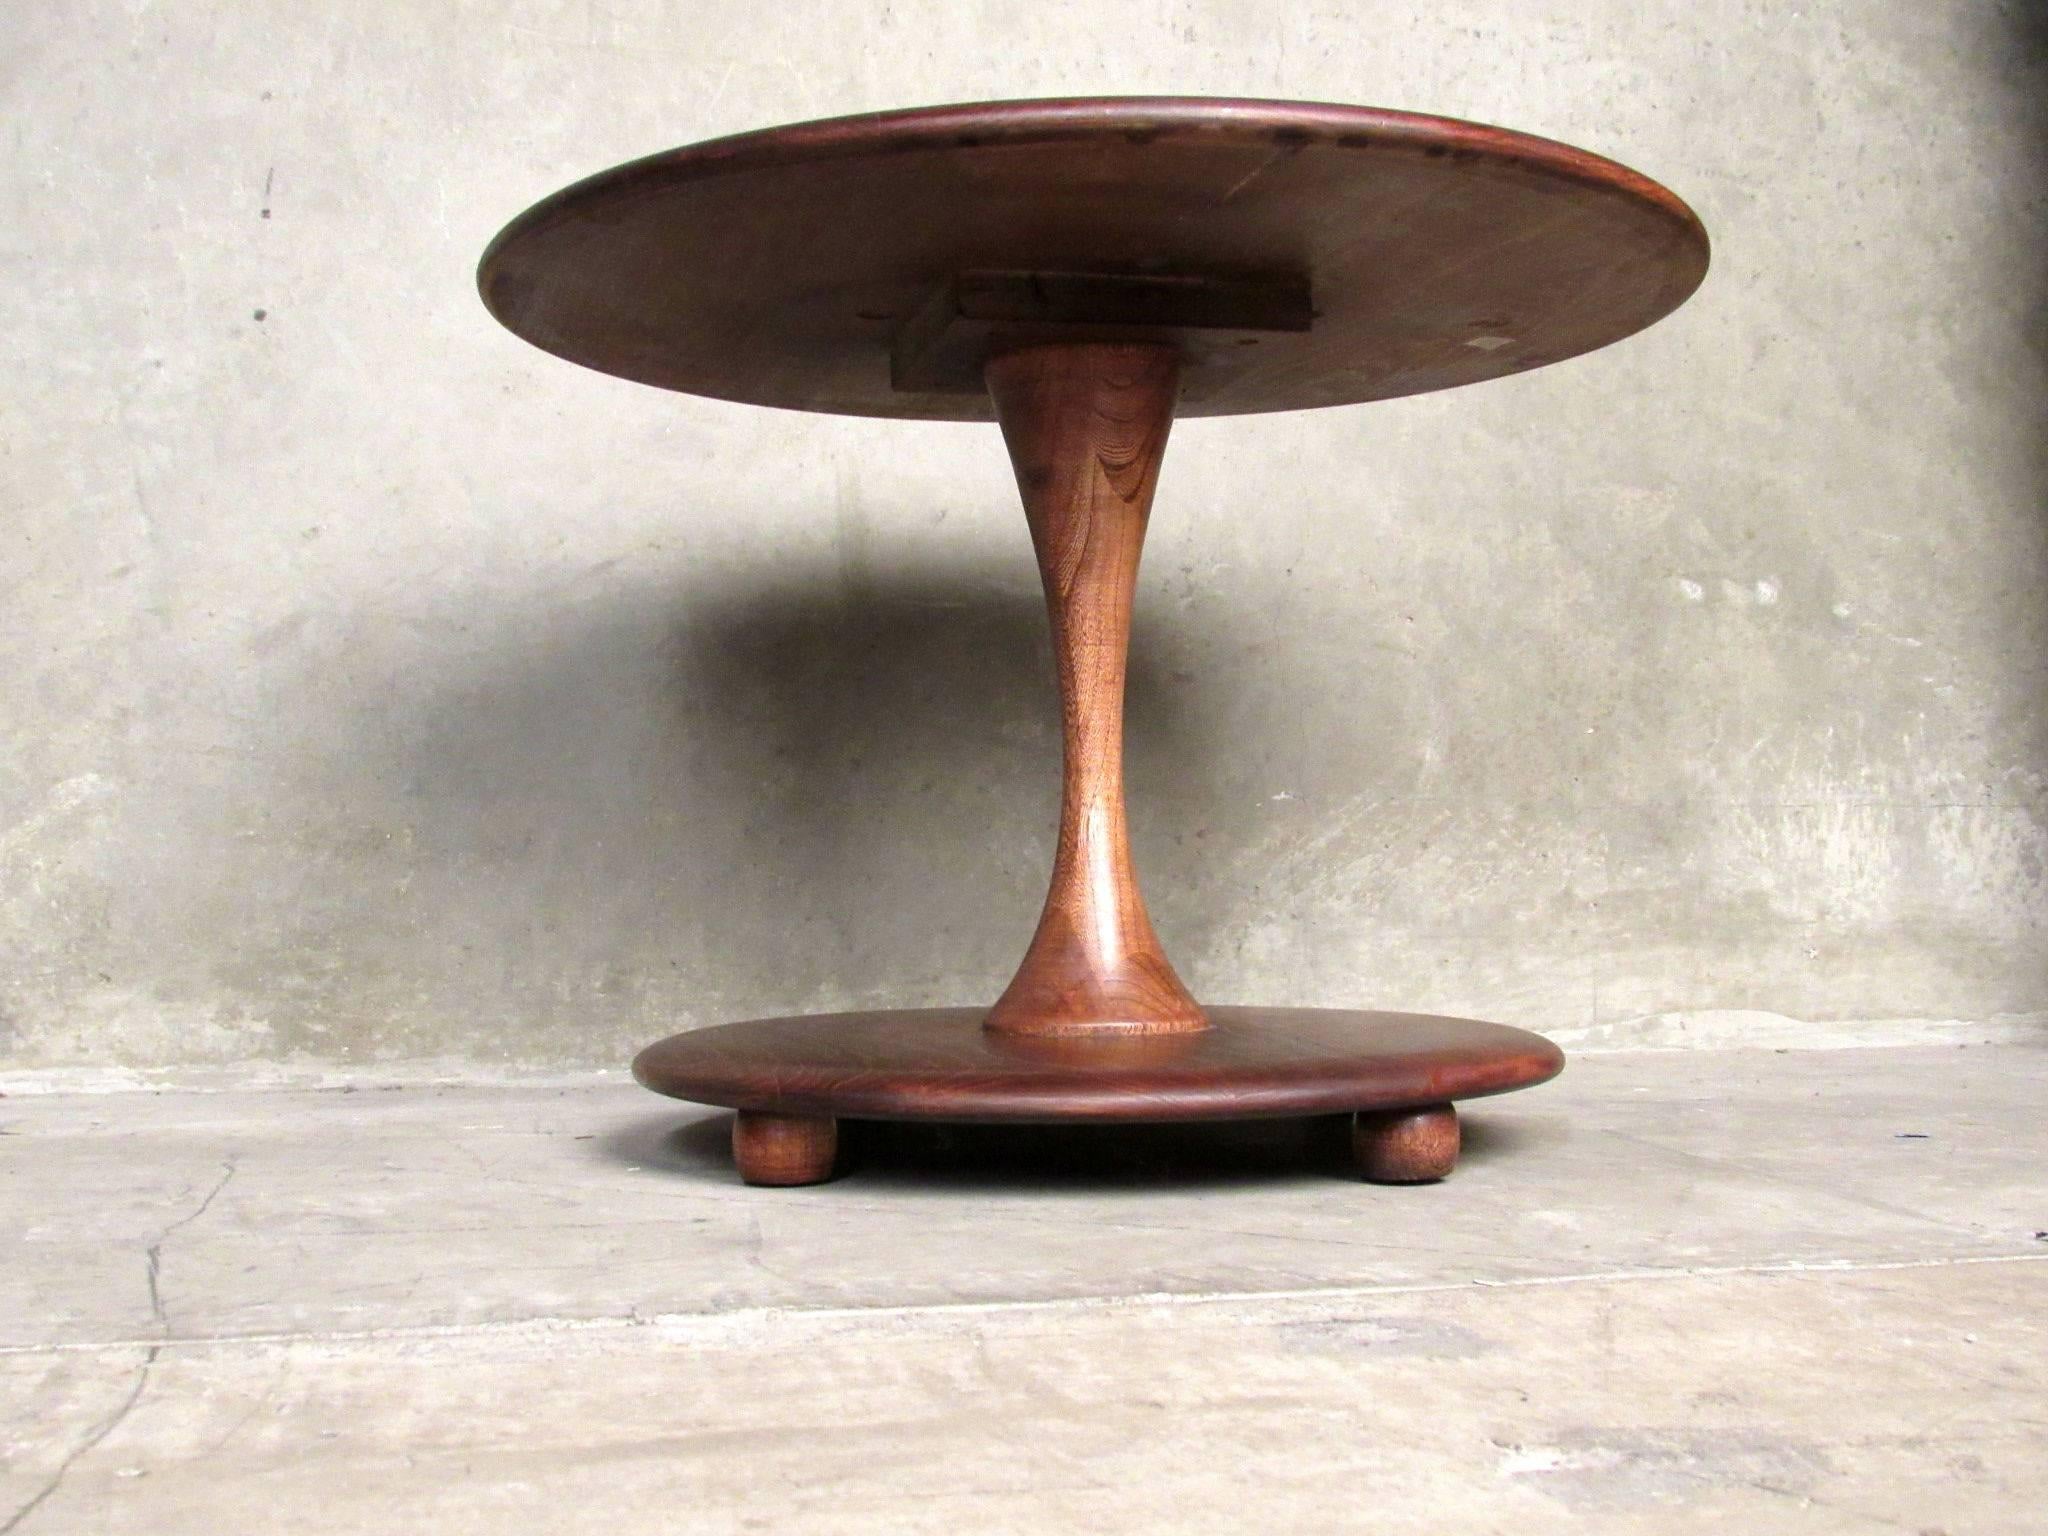 Walnut table with tulip baseLane Furniture from 1957.   Unusual earlier piece by Lane Furniture in the manner of Nanna Ditzel's 'Toadstool' Table of the same era.  In very good original condition.